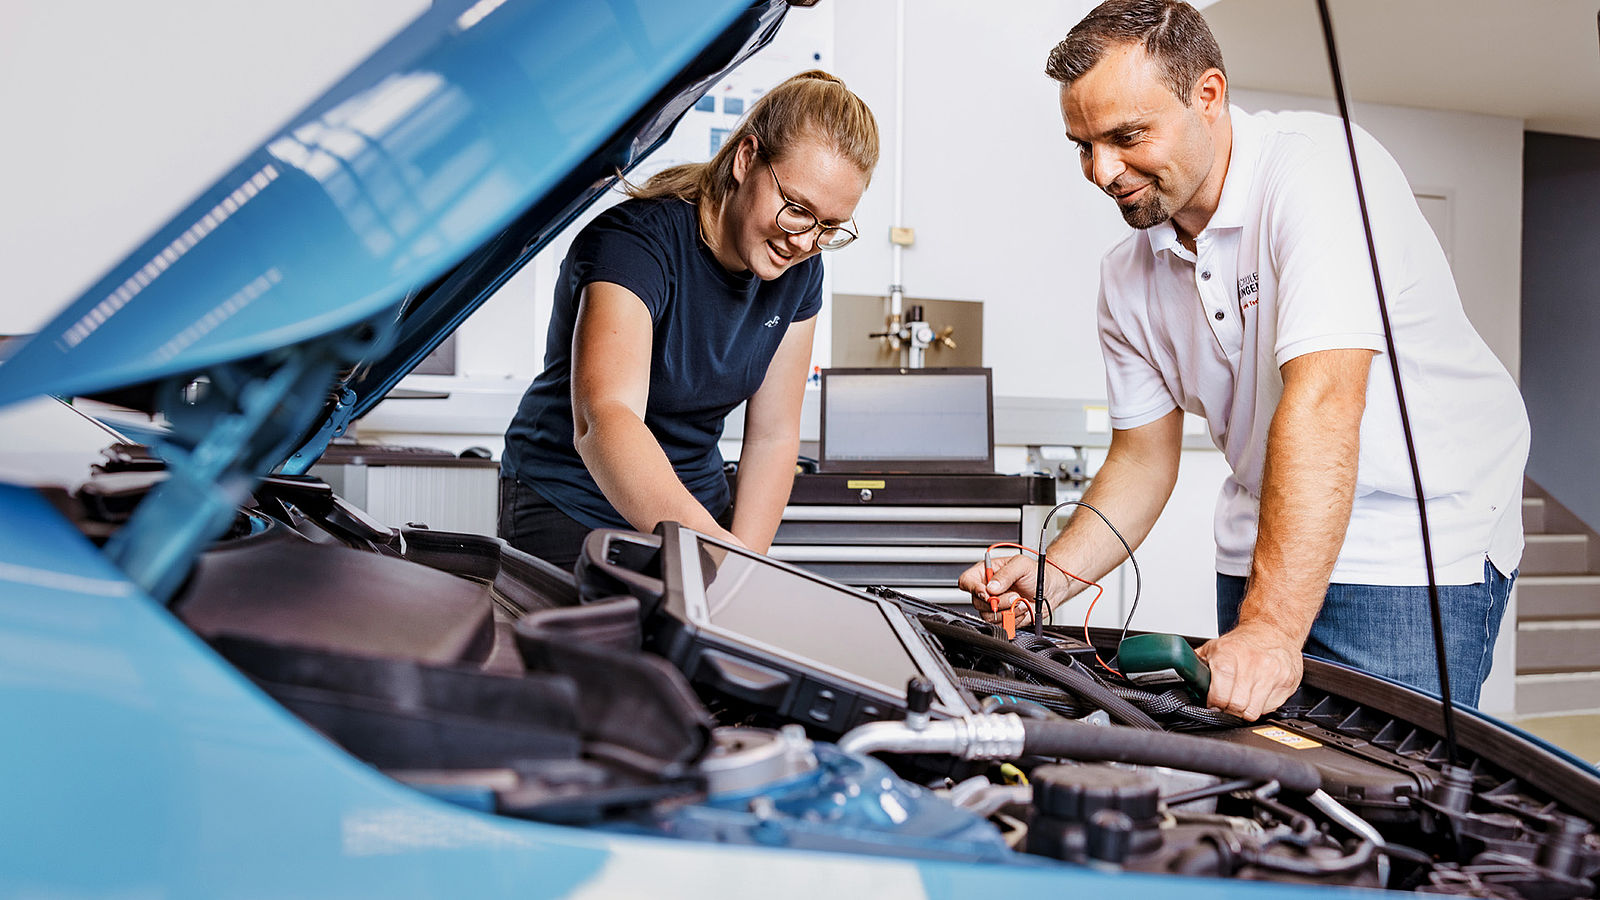 You can work as an academic lecturer or in the classical field of engineering after your studies in Engineering Education Automotive Engineering – Mechanical Engineering.